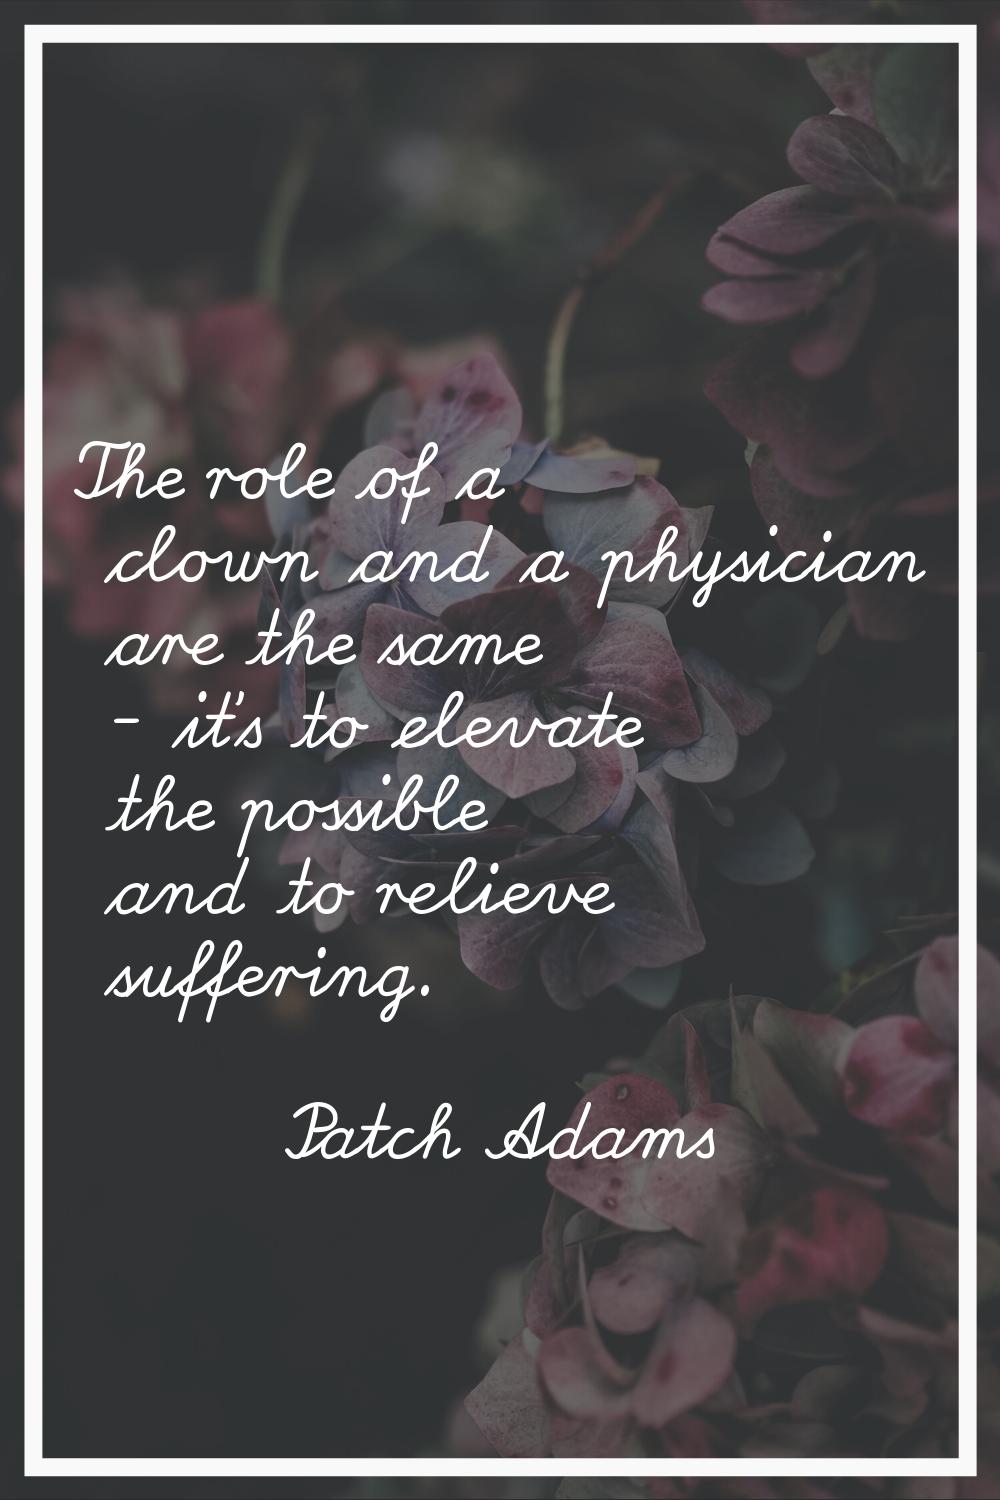 The role of a clown and a physician are the same - it's to elevate the possible and to relieve suff